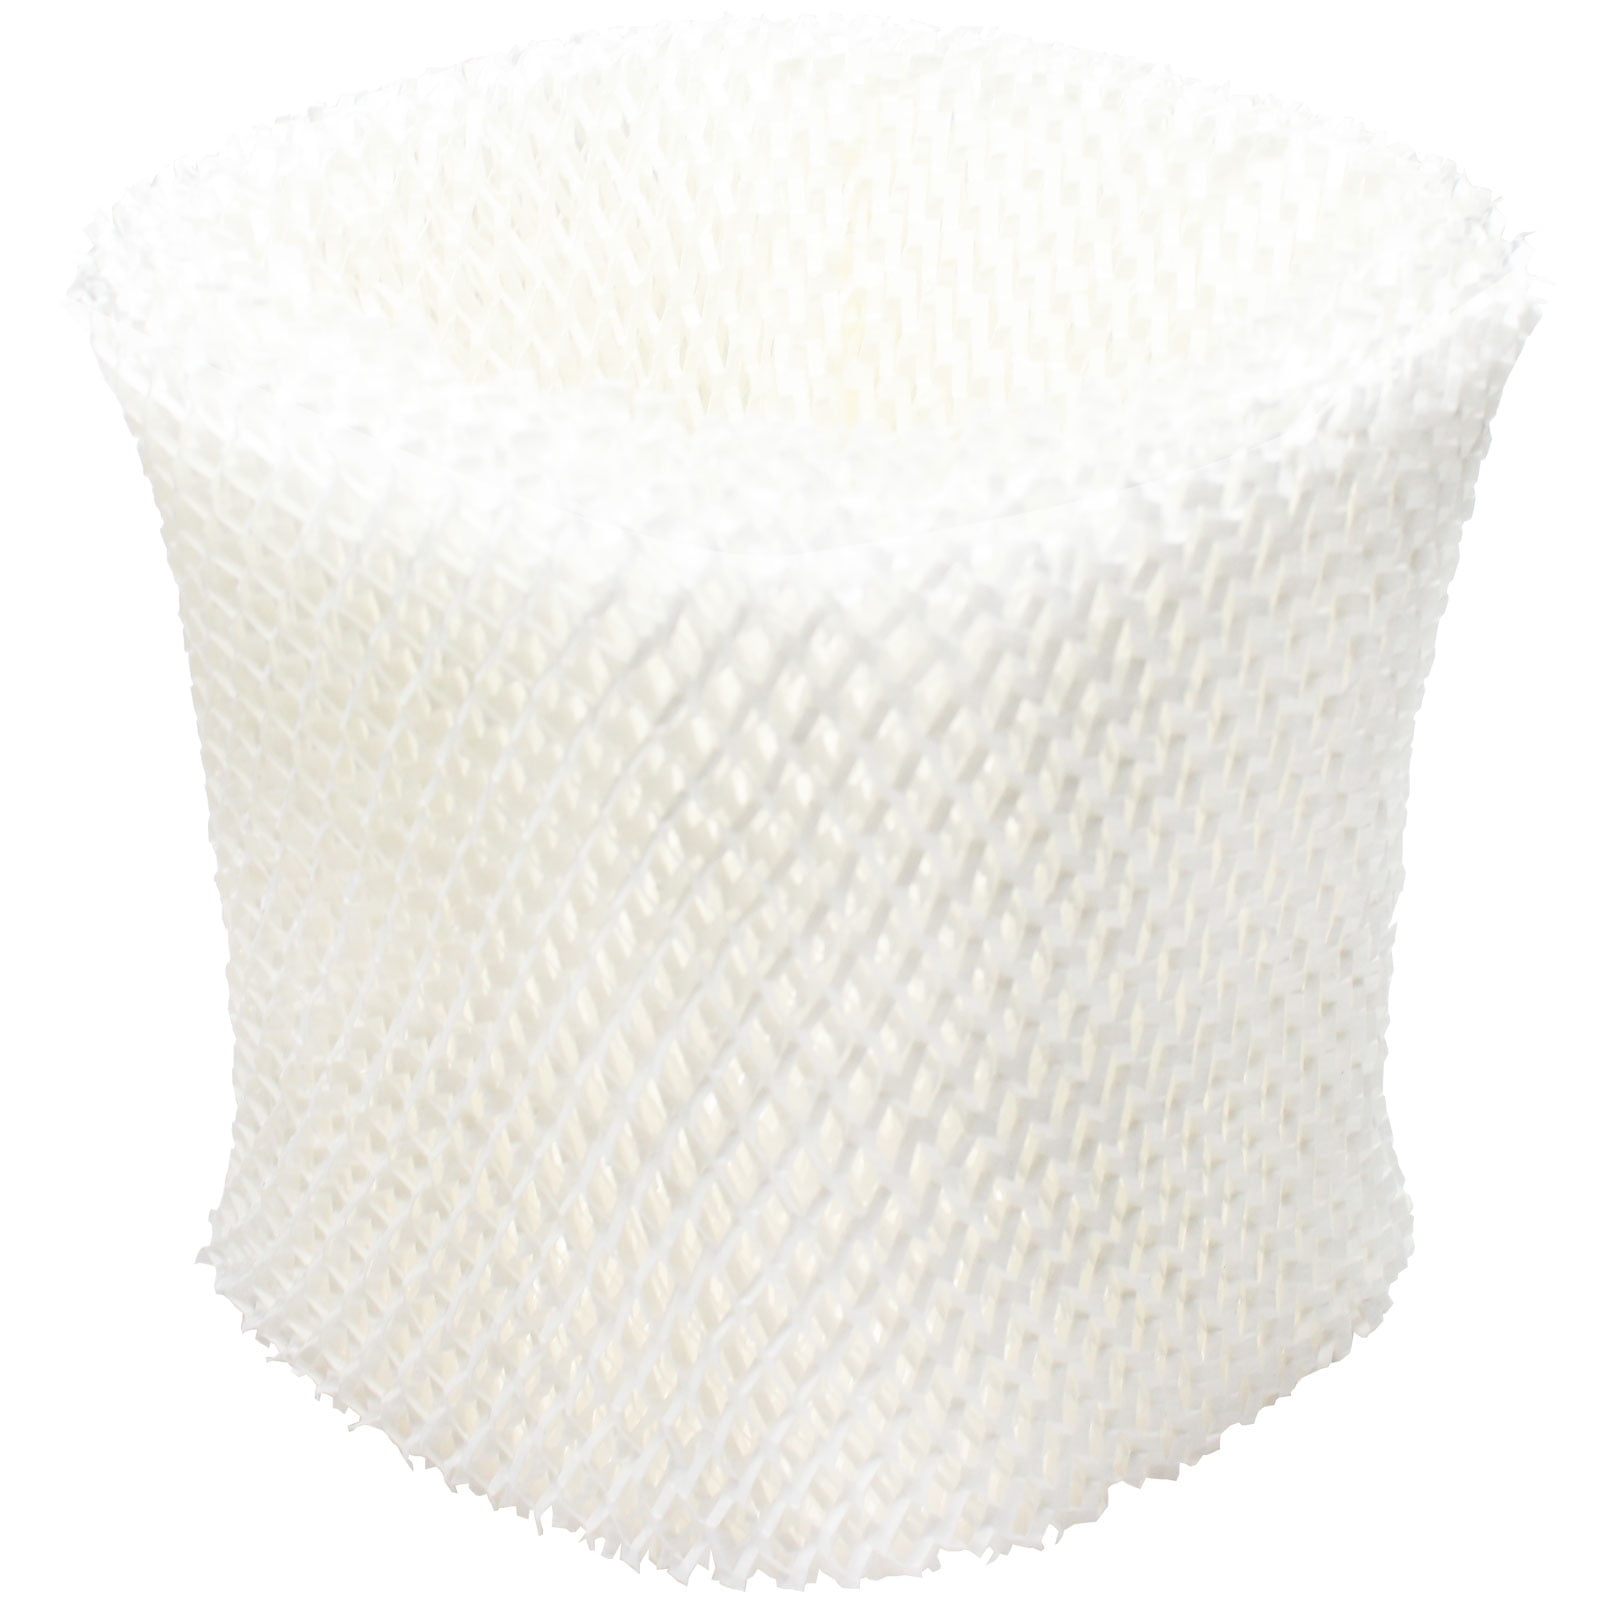 3 Pack Humidifier Filter Replacement for Holmes HM1800 